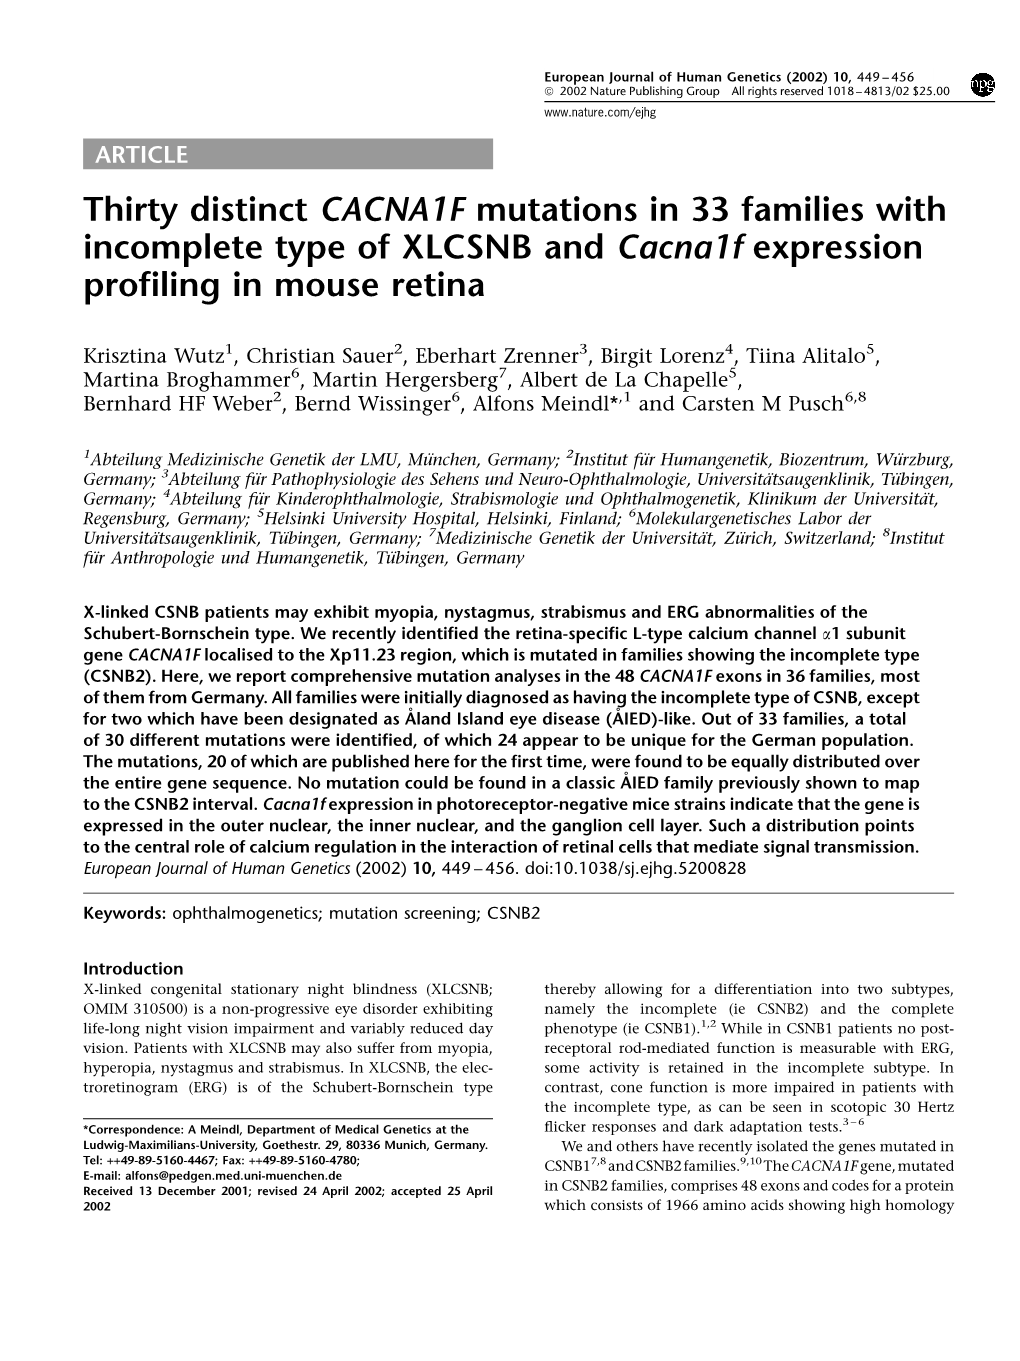 Thirty Distinct CACNA1F Mutations in 33 Families with Incomplete Type of XLCSNB and Cacna1f Expression Proﬁling in Mouse Retina